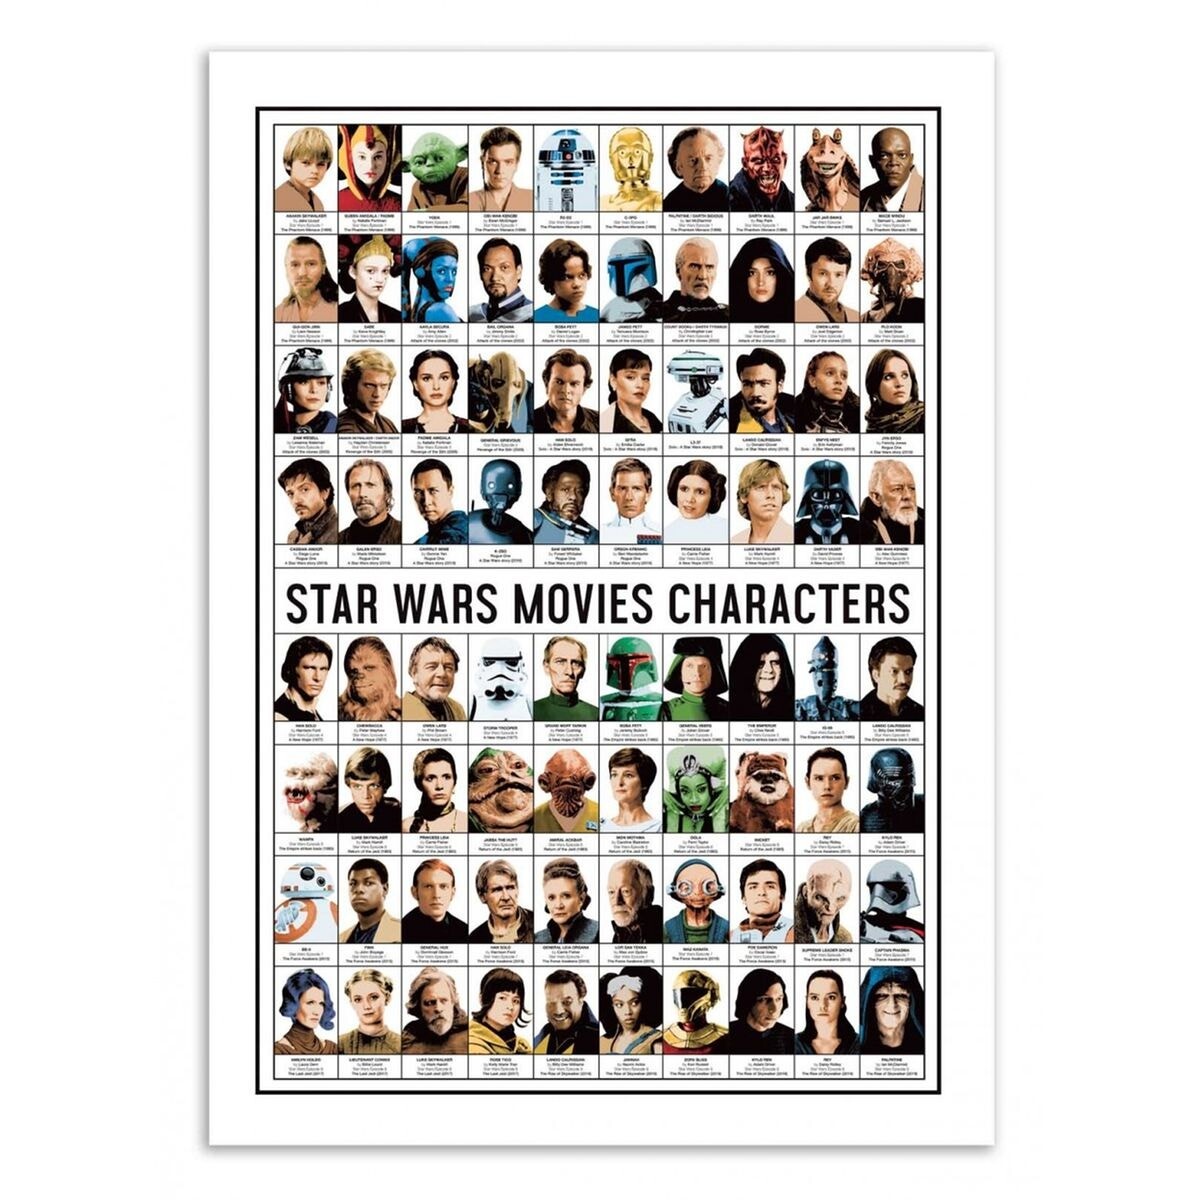 Poster d'art - Star Wars Movies Characters - Olivier Bourdereau